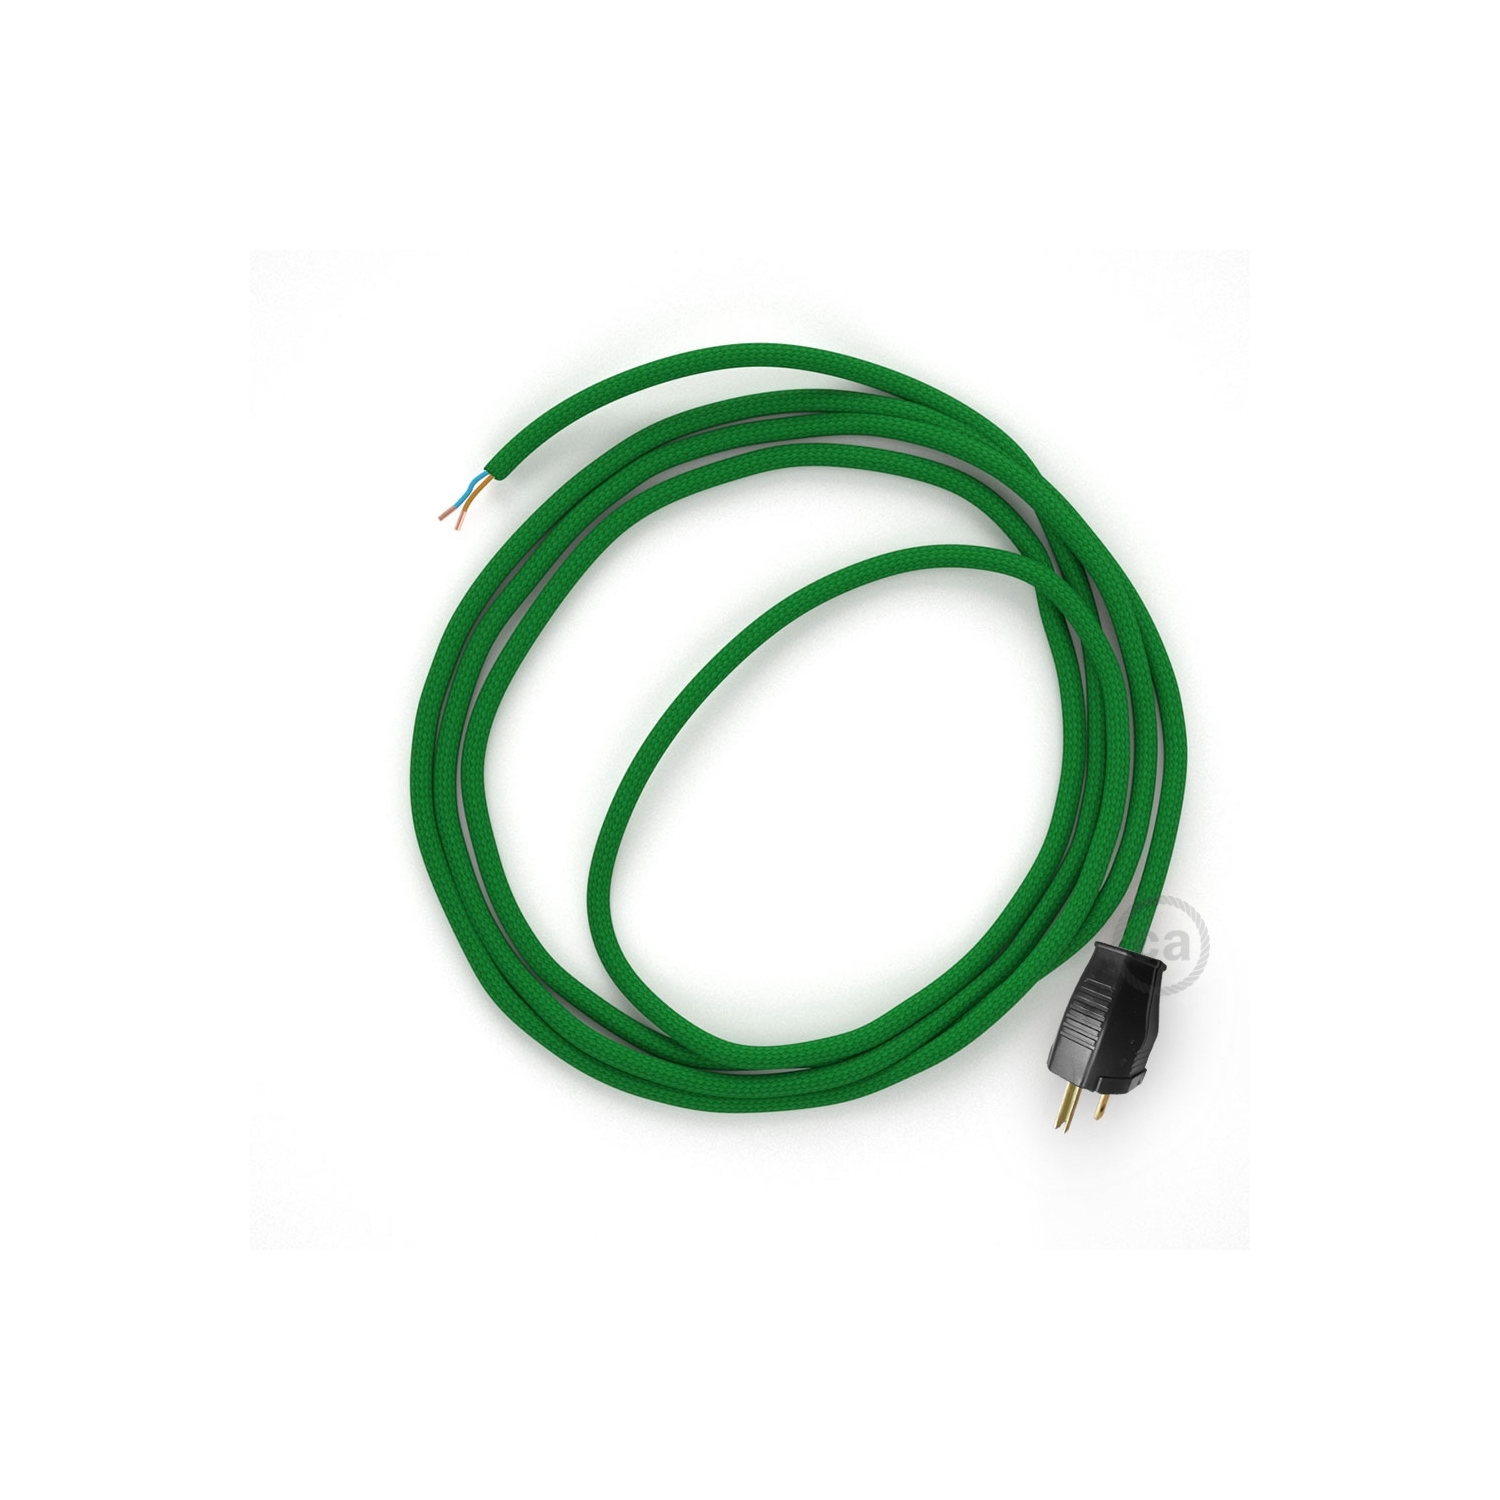 Cord-set - RM06 Green Rayon Covered Round Cable